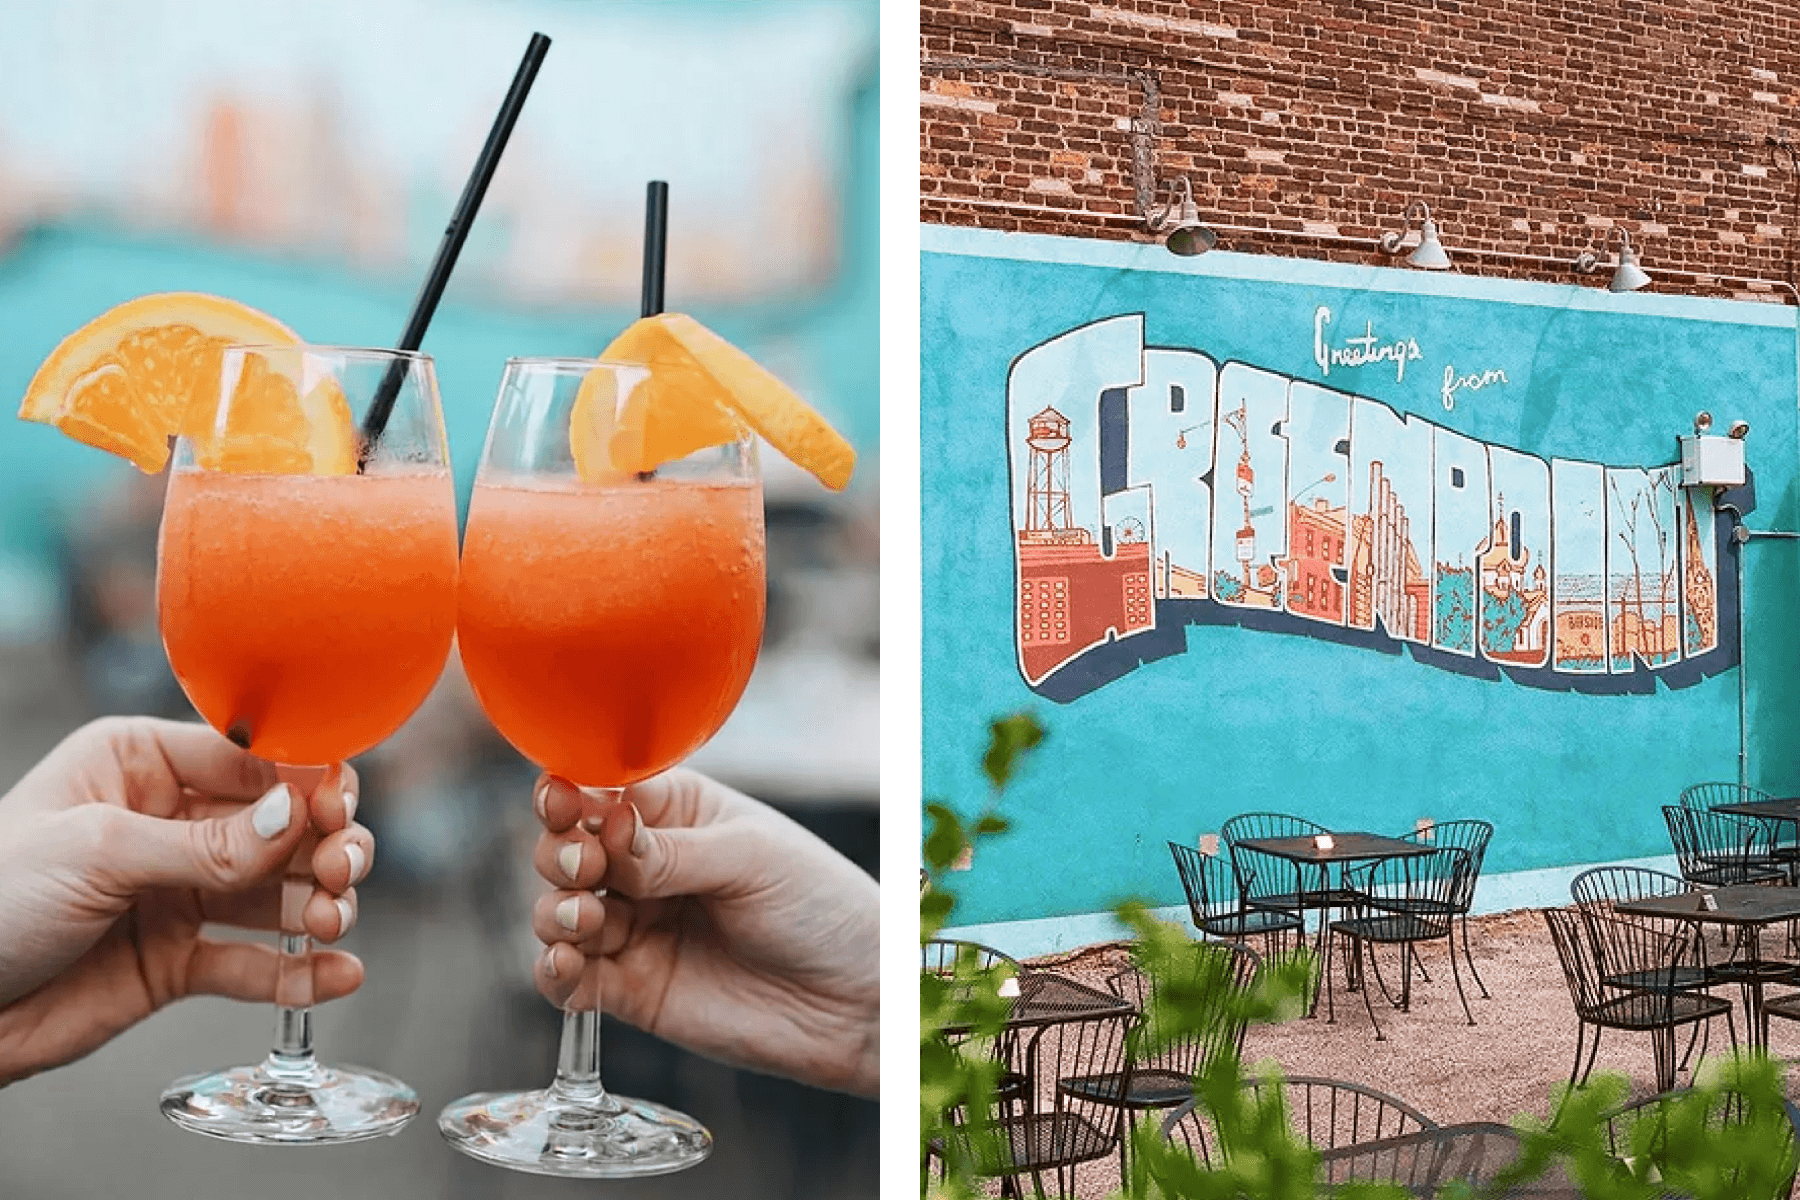 Left: Close up of hands clinking two Aperol Spritzes; Right: A mural at The Springs.